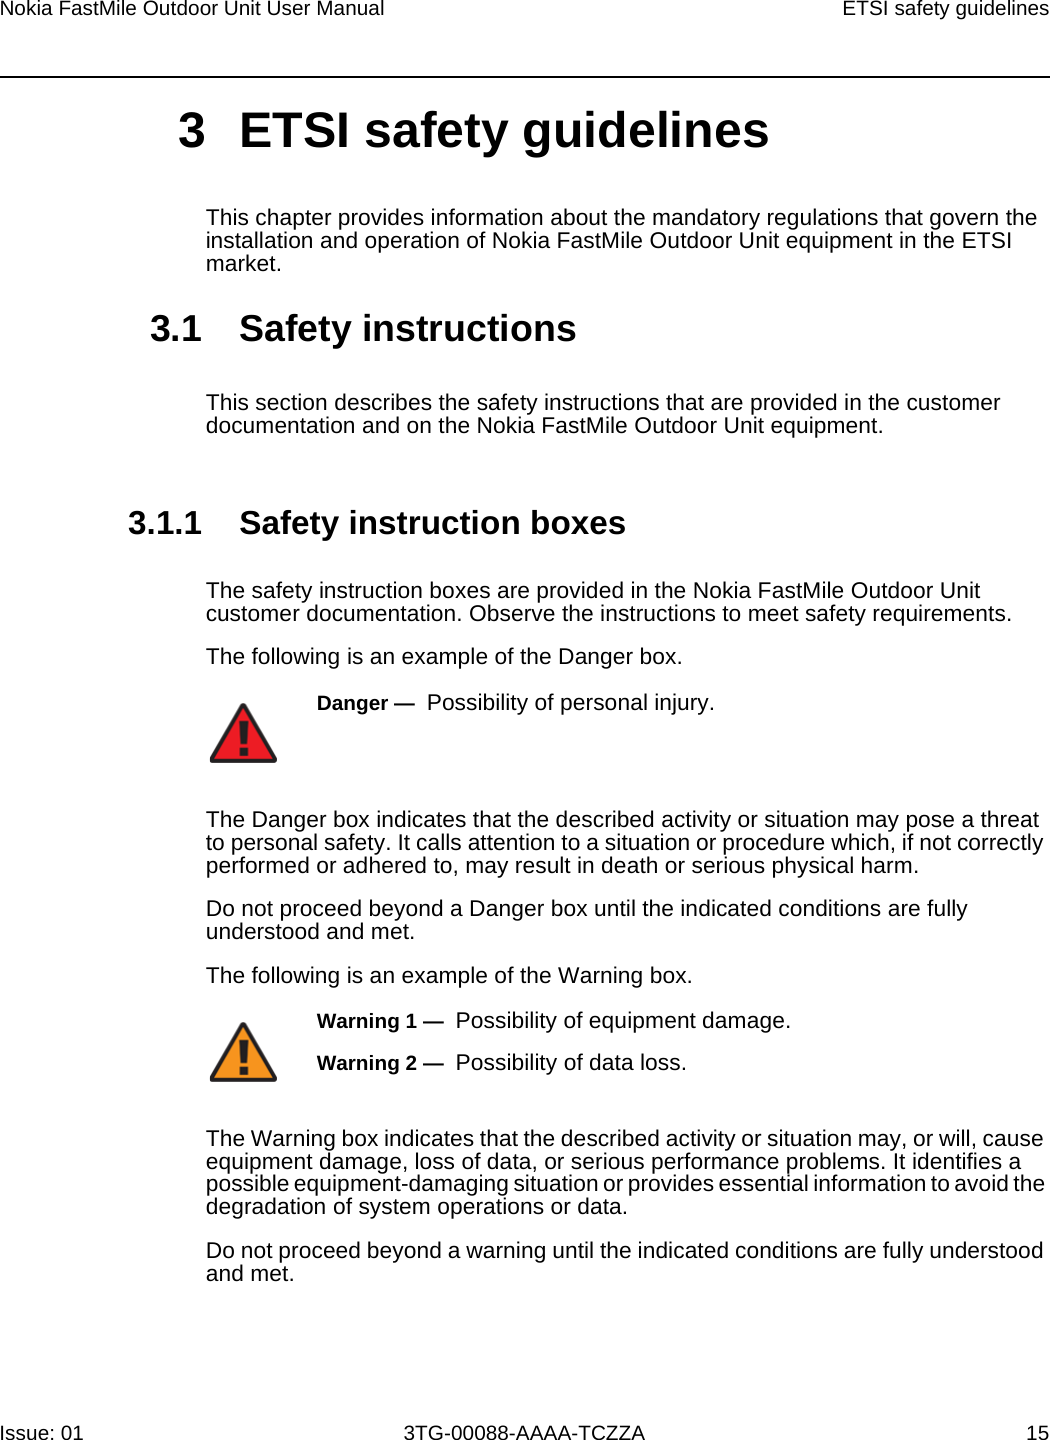 Nokia FastMile Outdoor Unit User Manual ETSI safety guidelinesIssue: 01 3TG-00088-AAAA-TCZZA 15 3 ETSI safety guidelinesThis chapter provides information about the mandatory regulations that govern the installation and operation of Nokia FastMile Outdoor Unit equipment in the ETSI market.3.1 Safety instructionsThis section describes the safety instructions that are provided in the customer documentation and on the Nokia FastMile Outdoor Unit equipment.3.1.1 Safety instruction boxesThe safety instruction boxes are provided in the Nokia FastMile Outdoor Unit customer documentation. Observe the instructions to meet safety requirements.The following is an example of the Danger box.The Danger box indicates that the described activity or situation may pose a threat to personal safety. It calls attention to a situation or procedure which, if not correctly performed or adhered to, may result in death or serious physical harm. Do not proceed beyond a Danger box until the indicated conditions are fully understood and met.The following is an example of the Warning box.The Warning box indicates that the described activity or situation may, or will, cause equipment damage, loss of data, or serious performance problems. It identifies a possible equipment-damaging situation or provides essential information to avoid the degradation of system operations or data.Do not proceed beyond a warning until the indicated conditions are fully understood and met.Danger —  Possibility of personal injury. Warning 1 —  Possibility of equipment damage.Warning 2 —  Possibility of data loss.